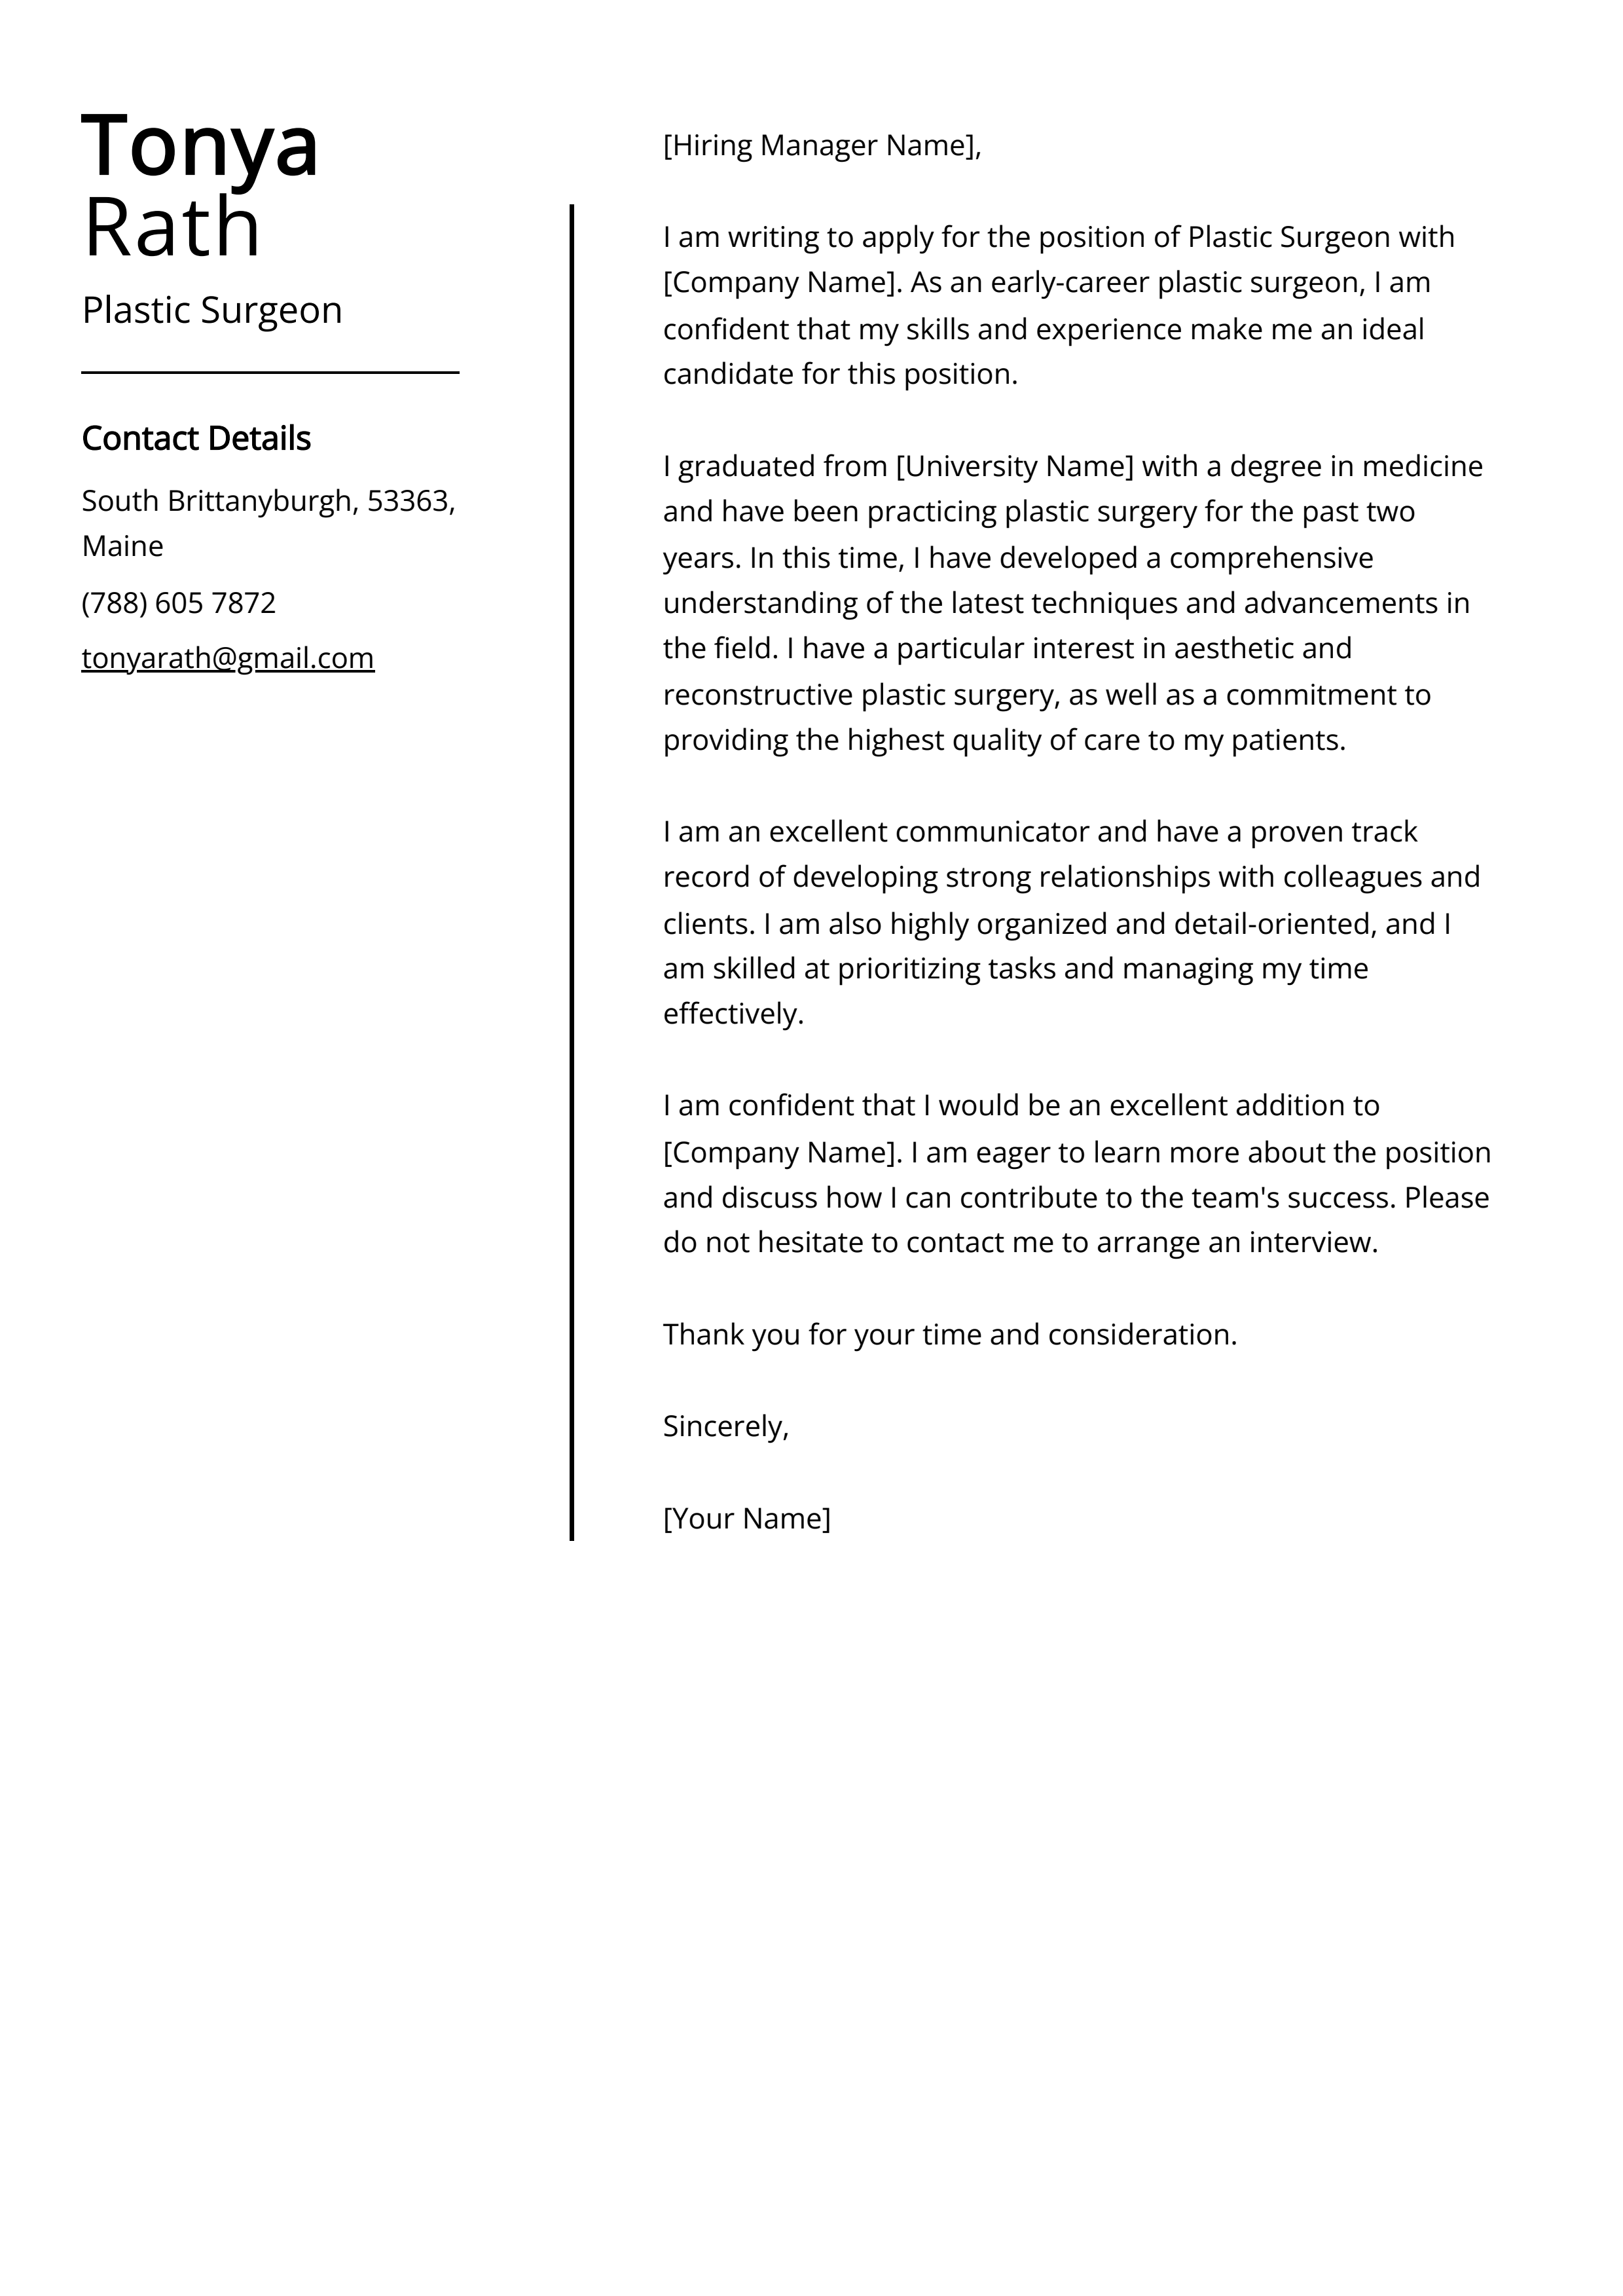 Plastic Surgeon Cover Letter Example